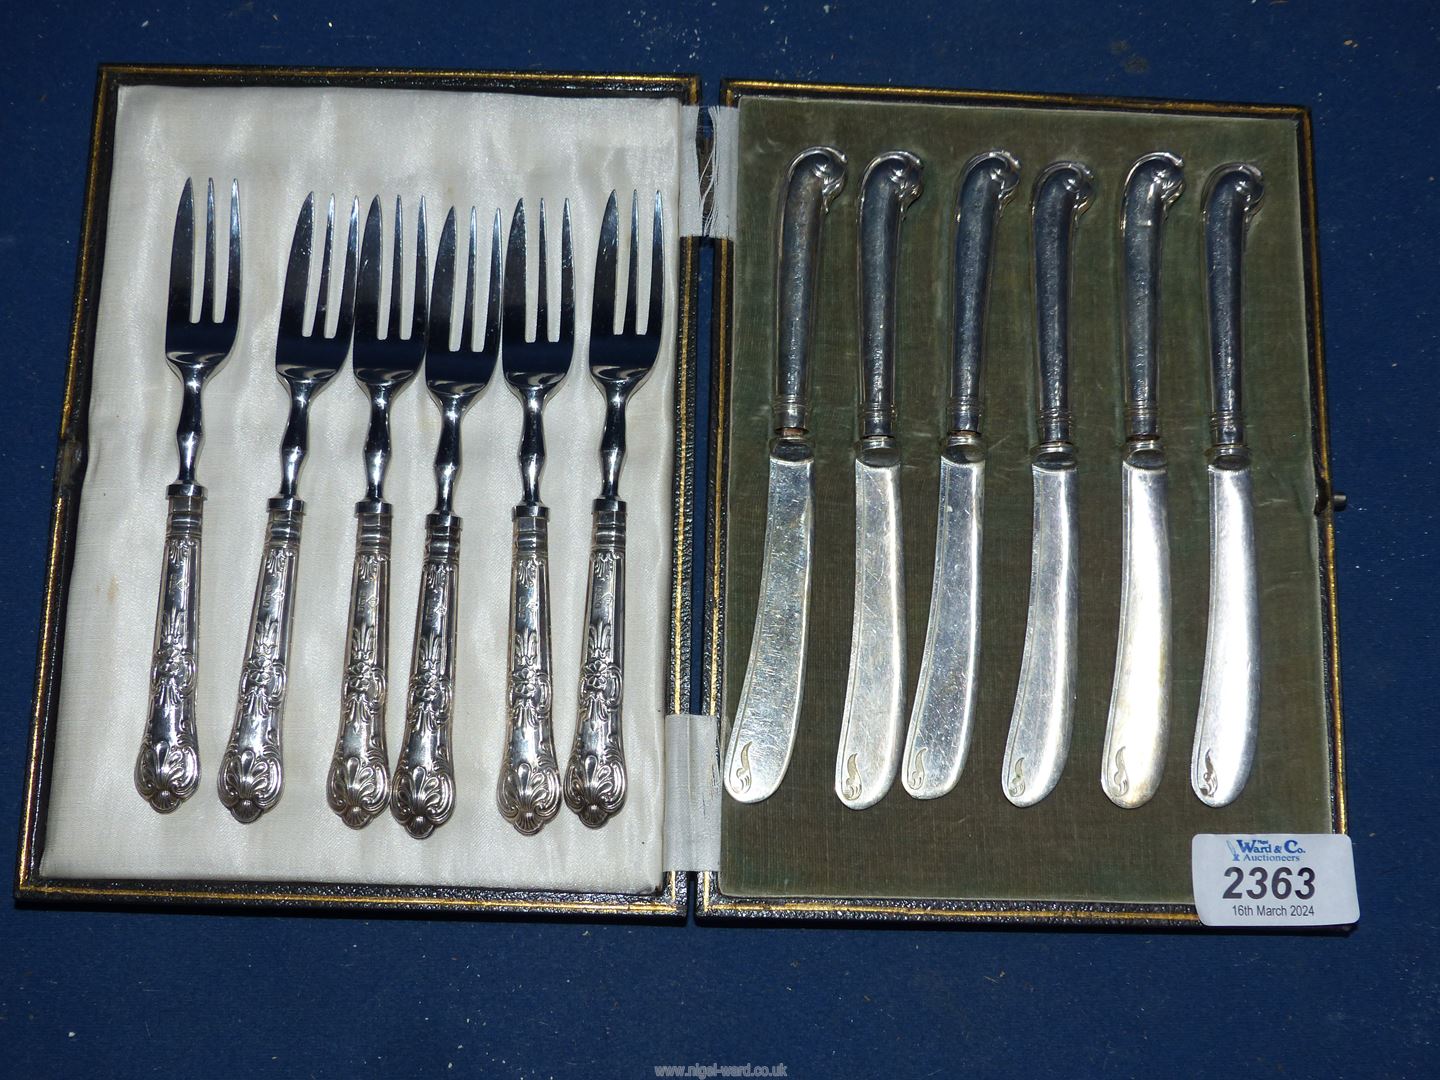 A cased set of Butter Knives with Sheffield Silver handles dated 1917 & a set of 6 Cake Forks with